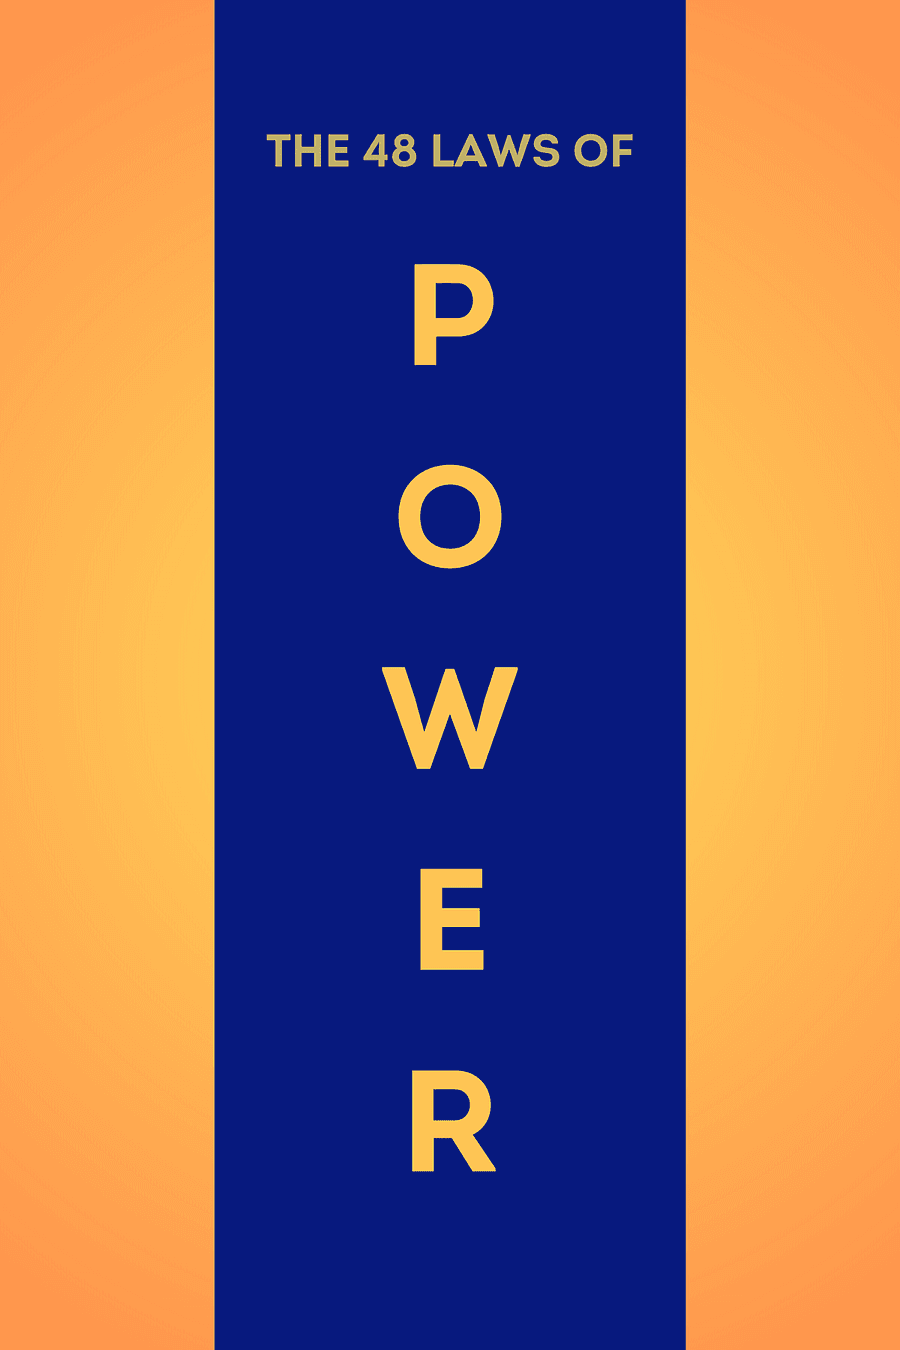 The 48 Laws of Power by Robert Greene - Book Summary